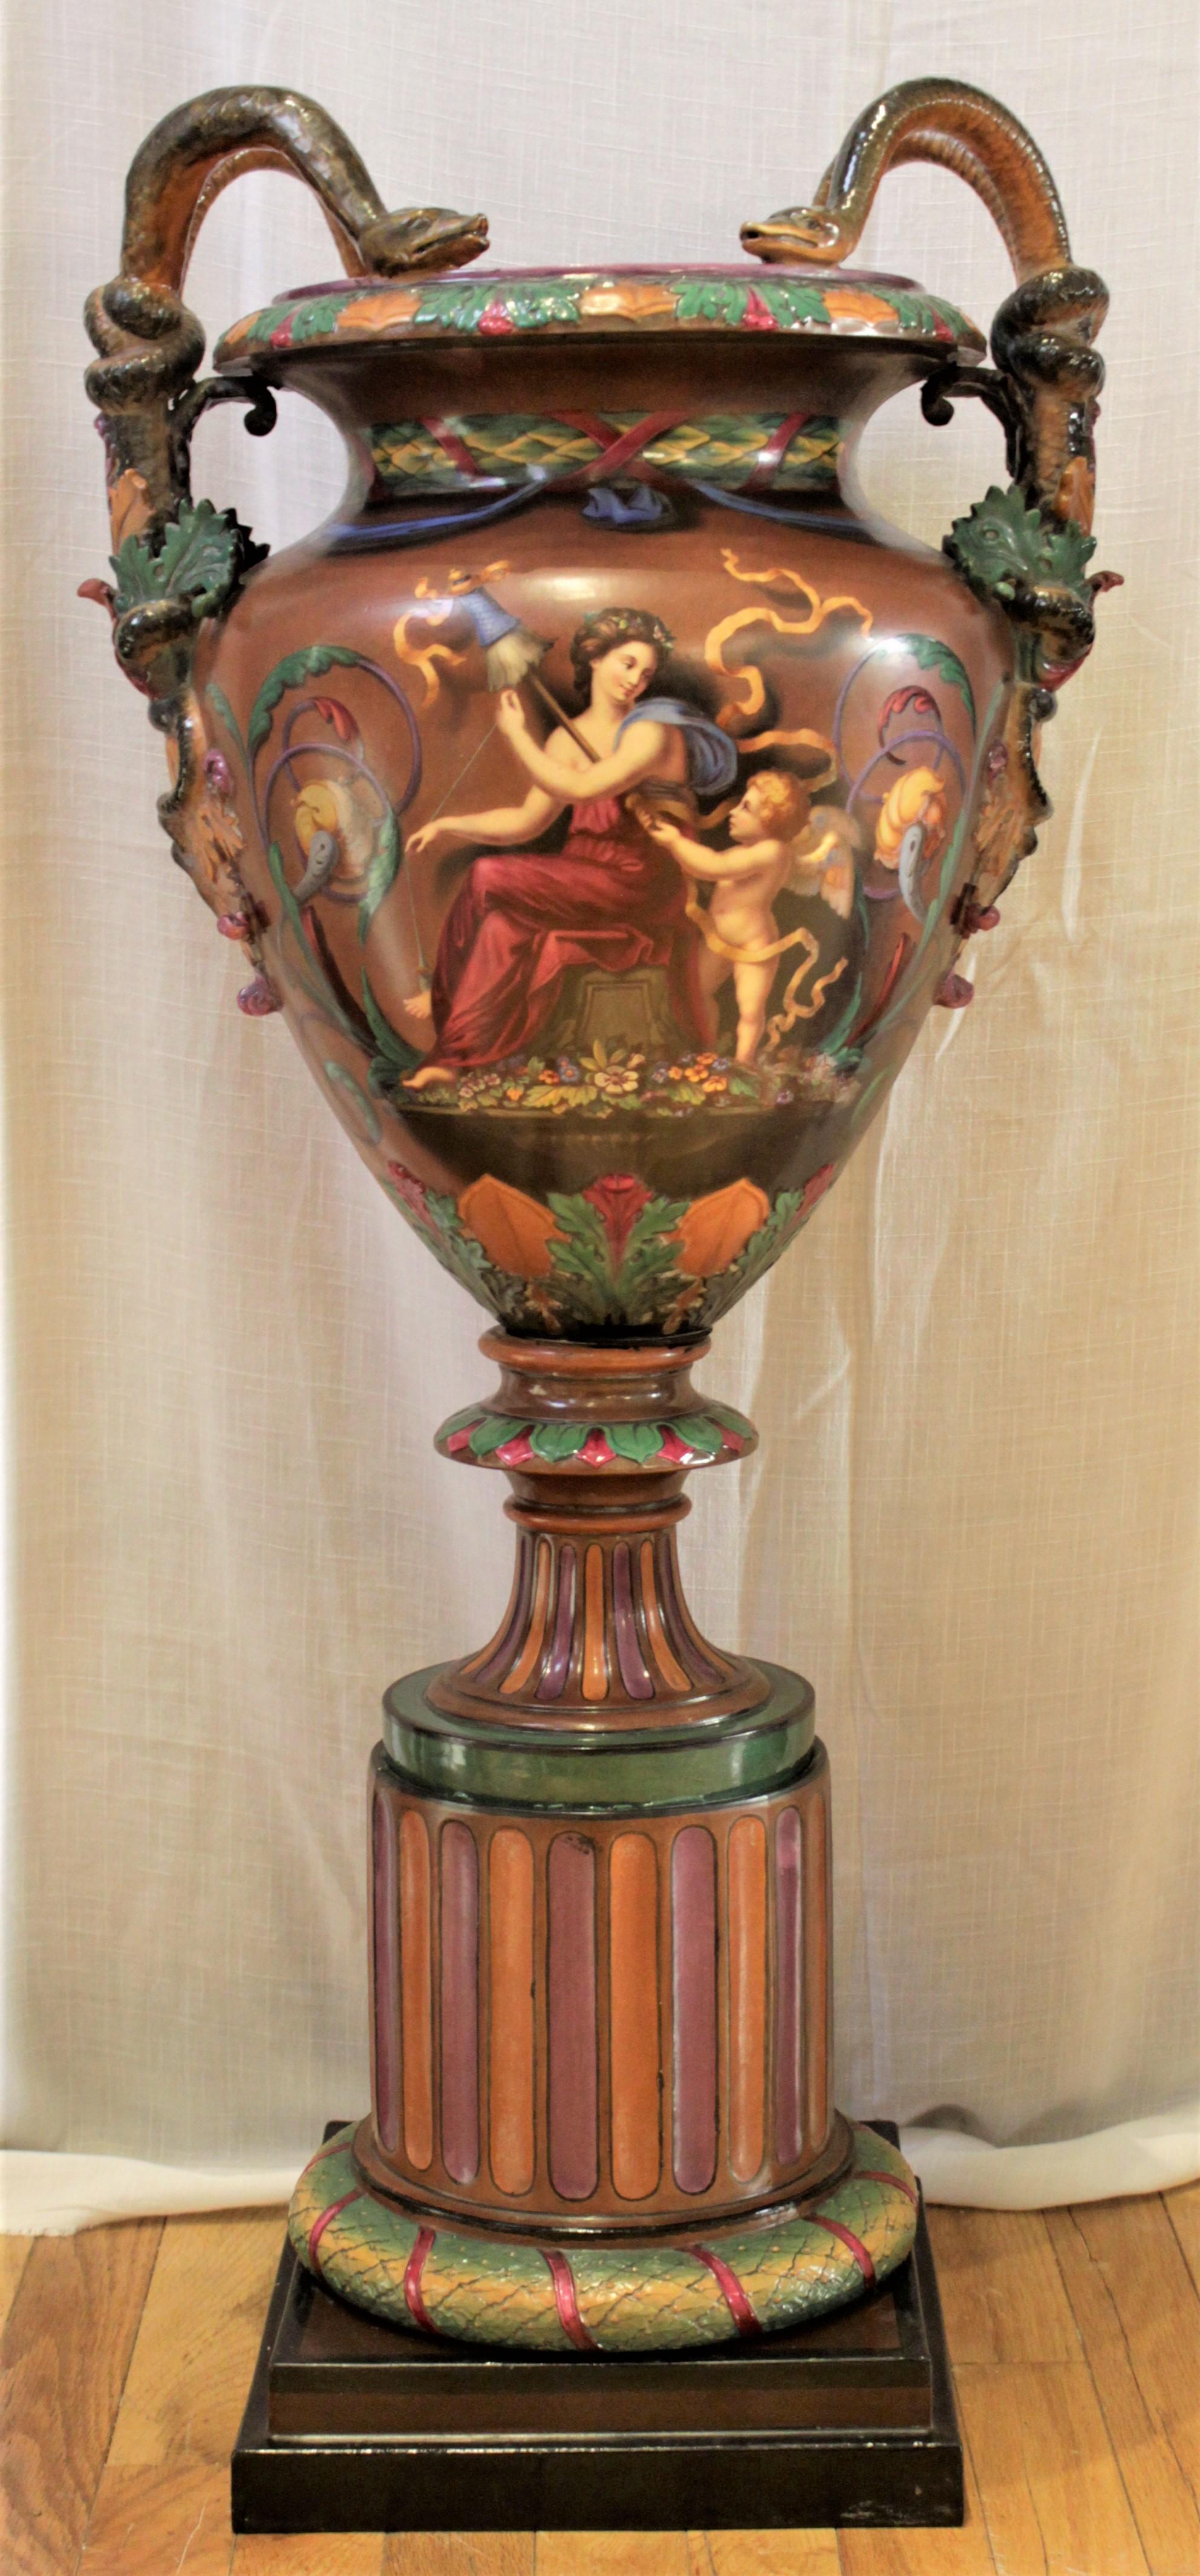 This large and impressive antique majolica Exhibition vase or urn was made by the Royal Worcester factory in approximately 1864 in the Baroque Revival style. This piece is clearly stamped with the Royal Worcester crown mark in triplicate on the